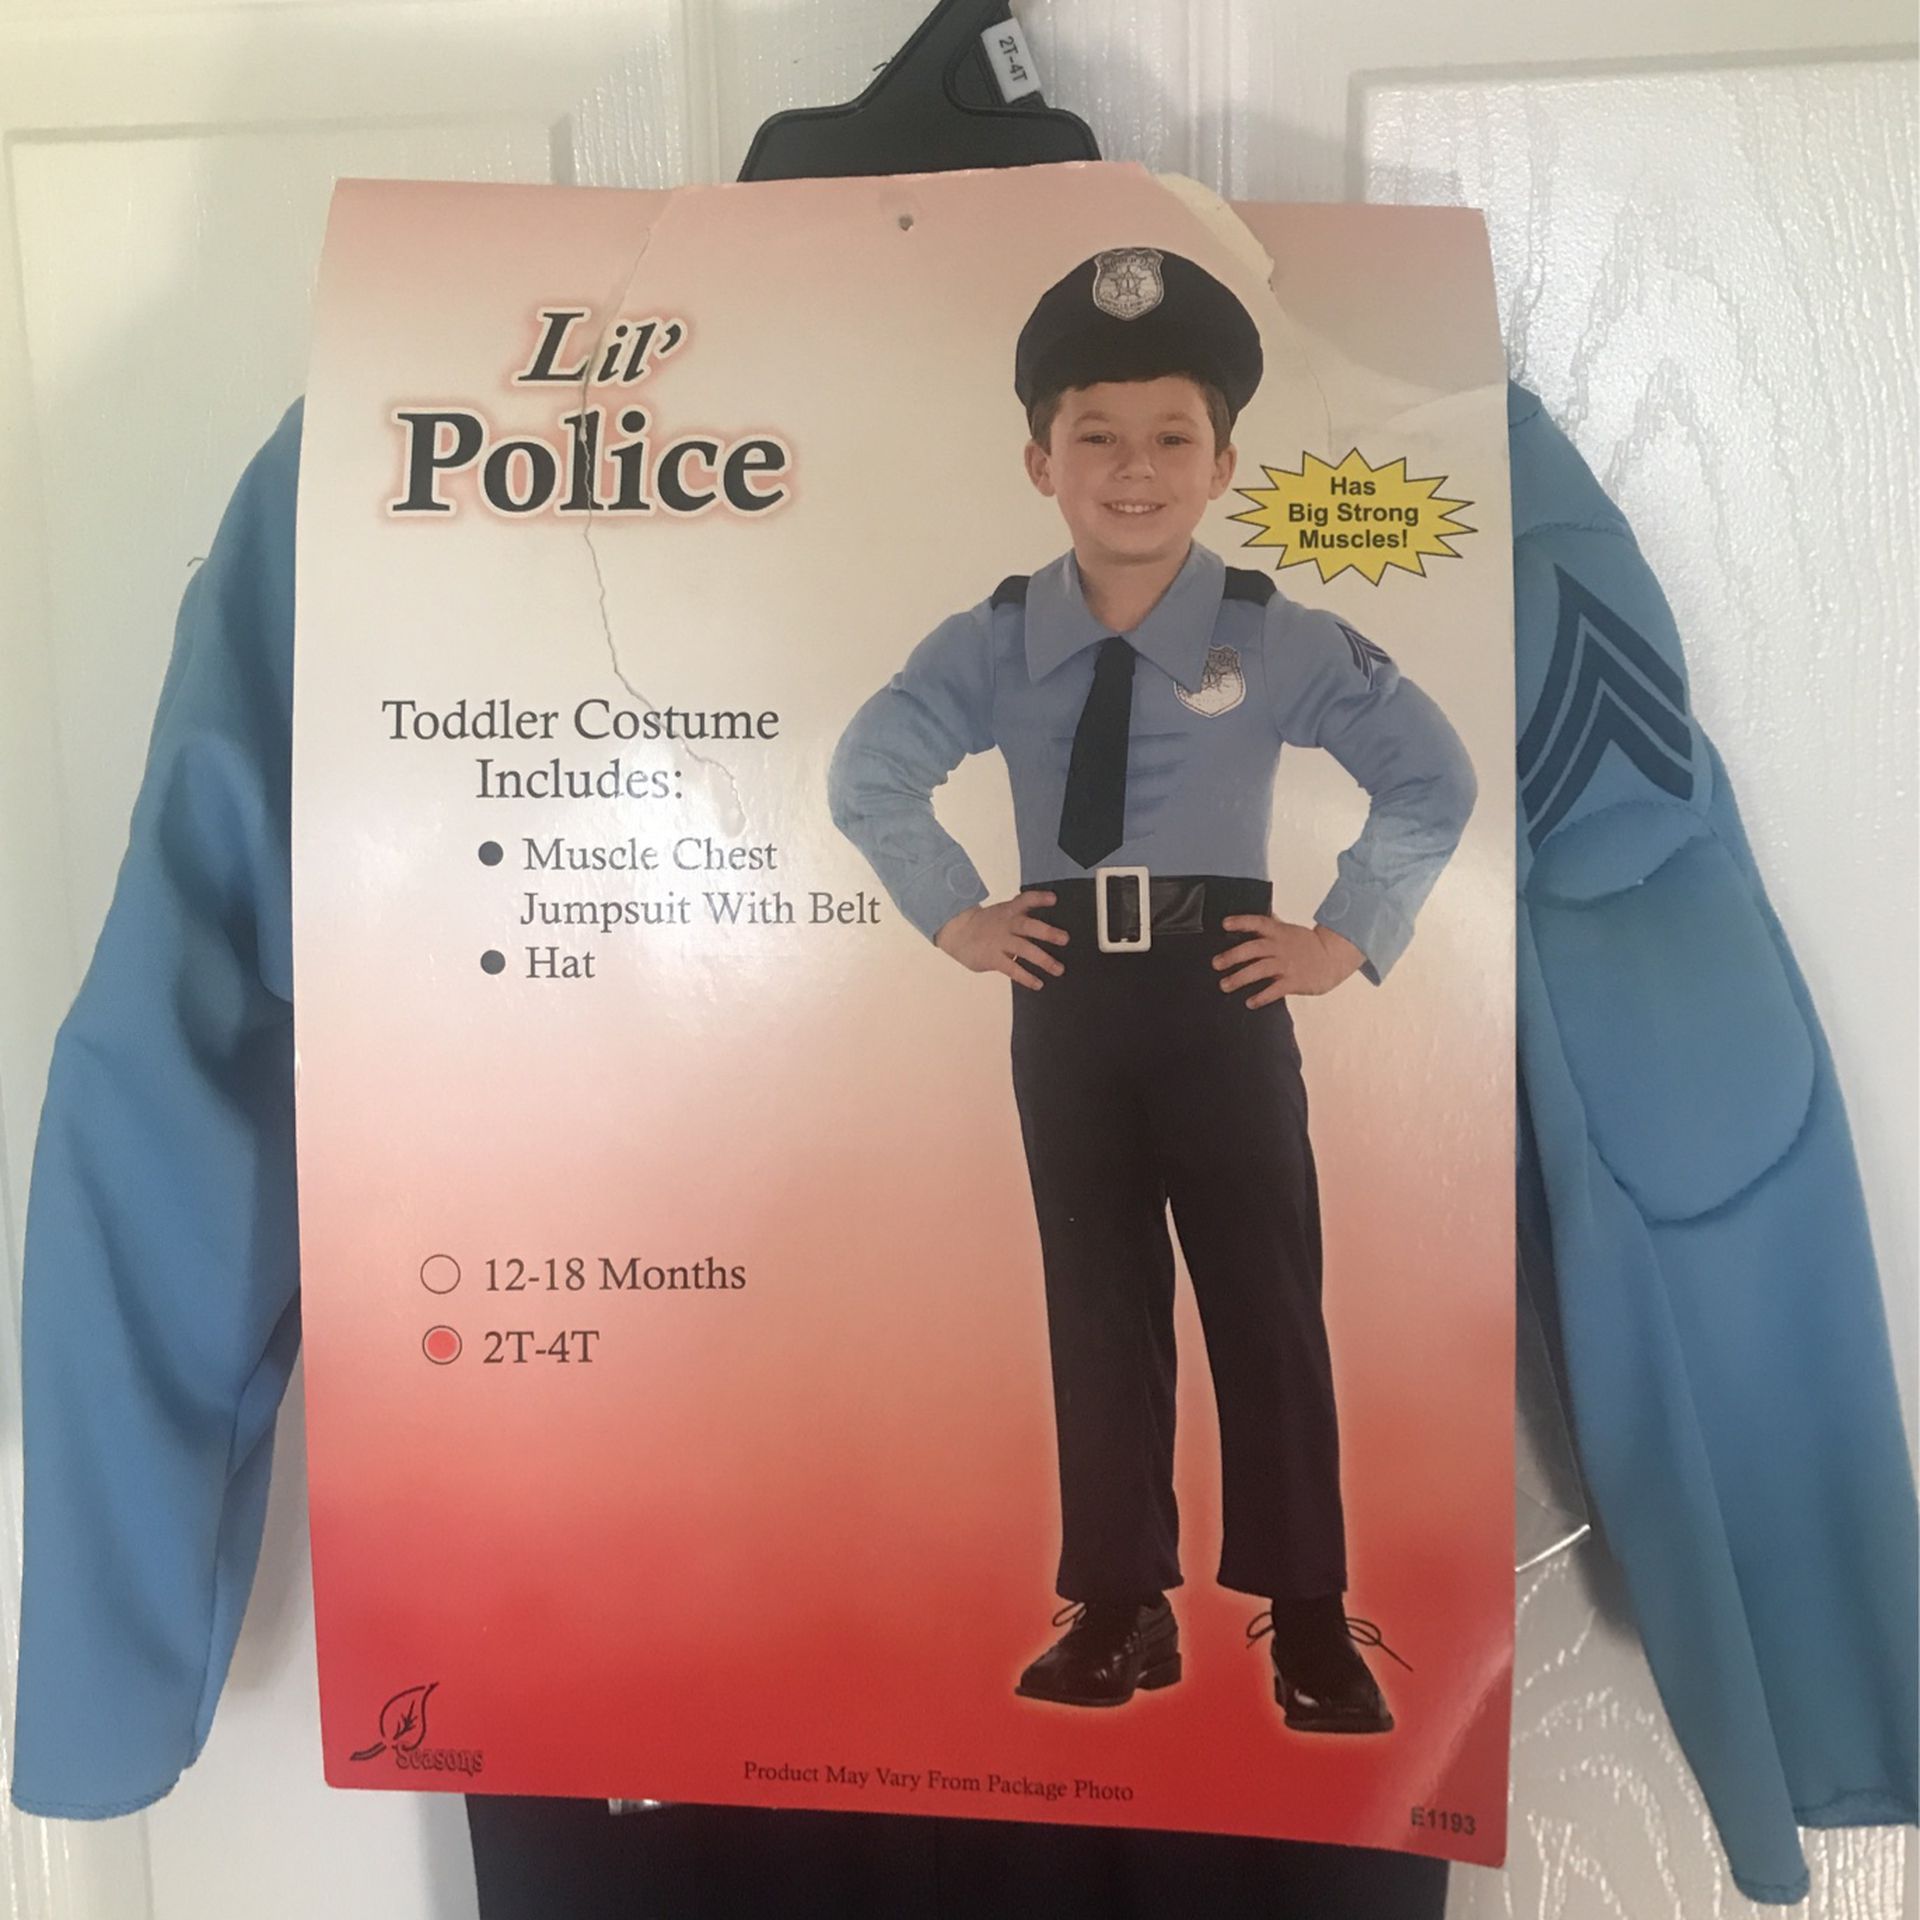 Halloween Lil’ Police Costume Toddler Size 2T - 4T New 